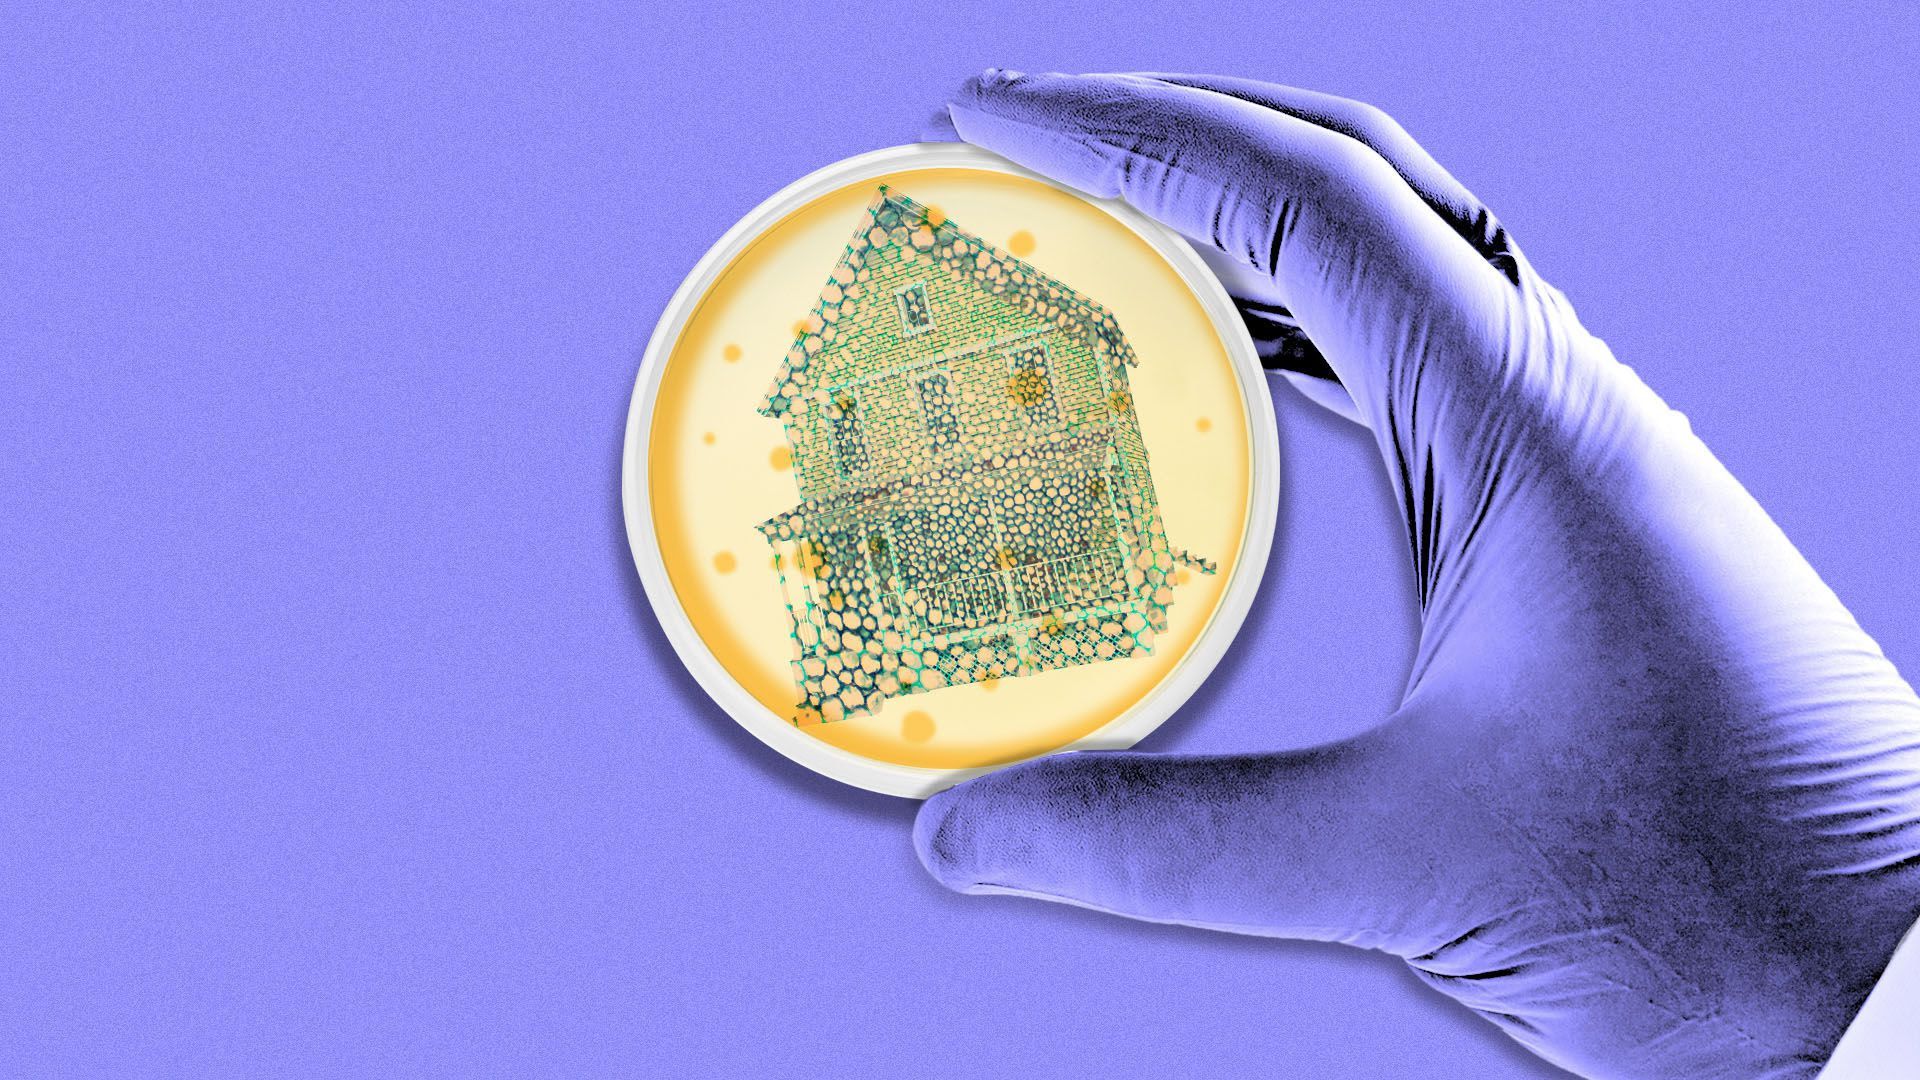 Illustration of a hand holding a petri dish with the bacteria in the shape of a house